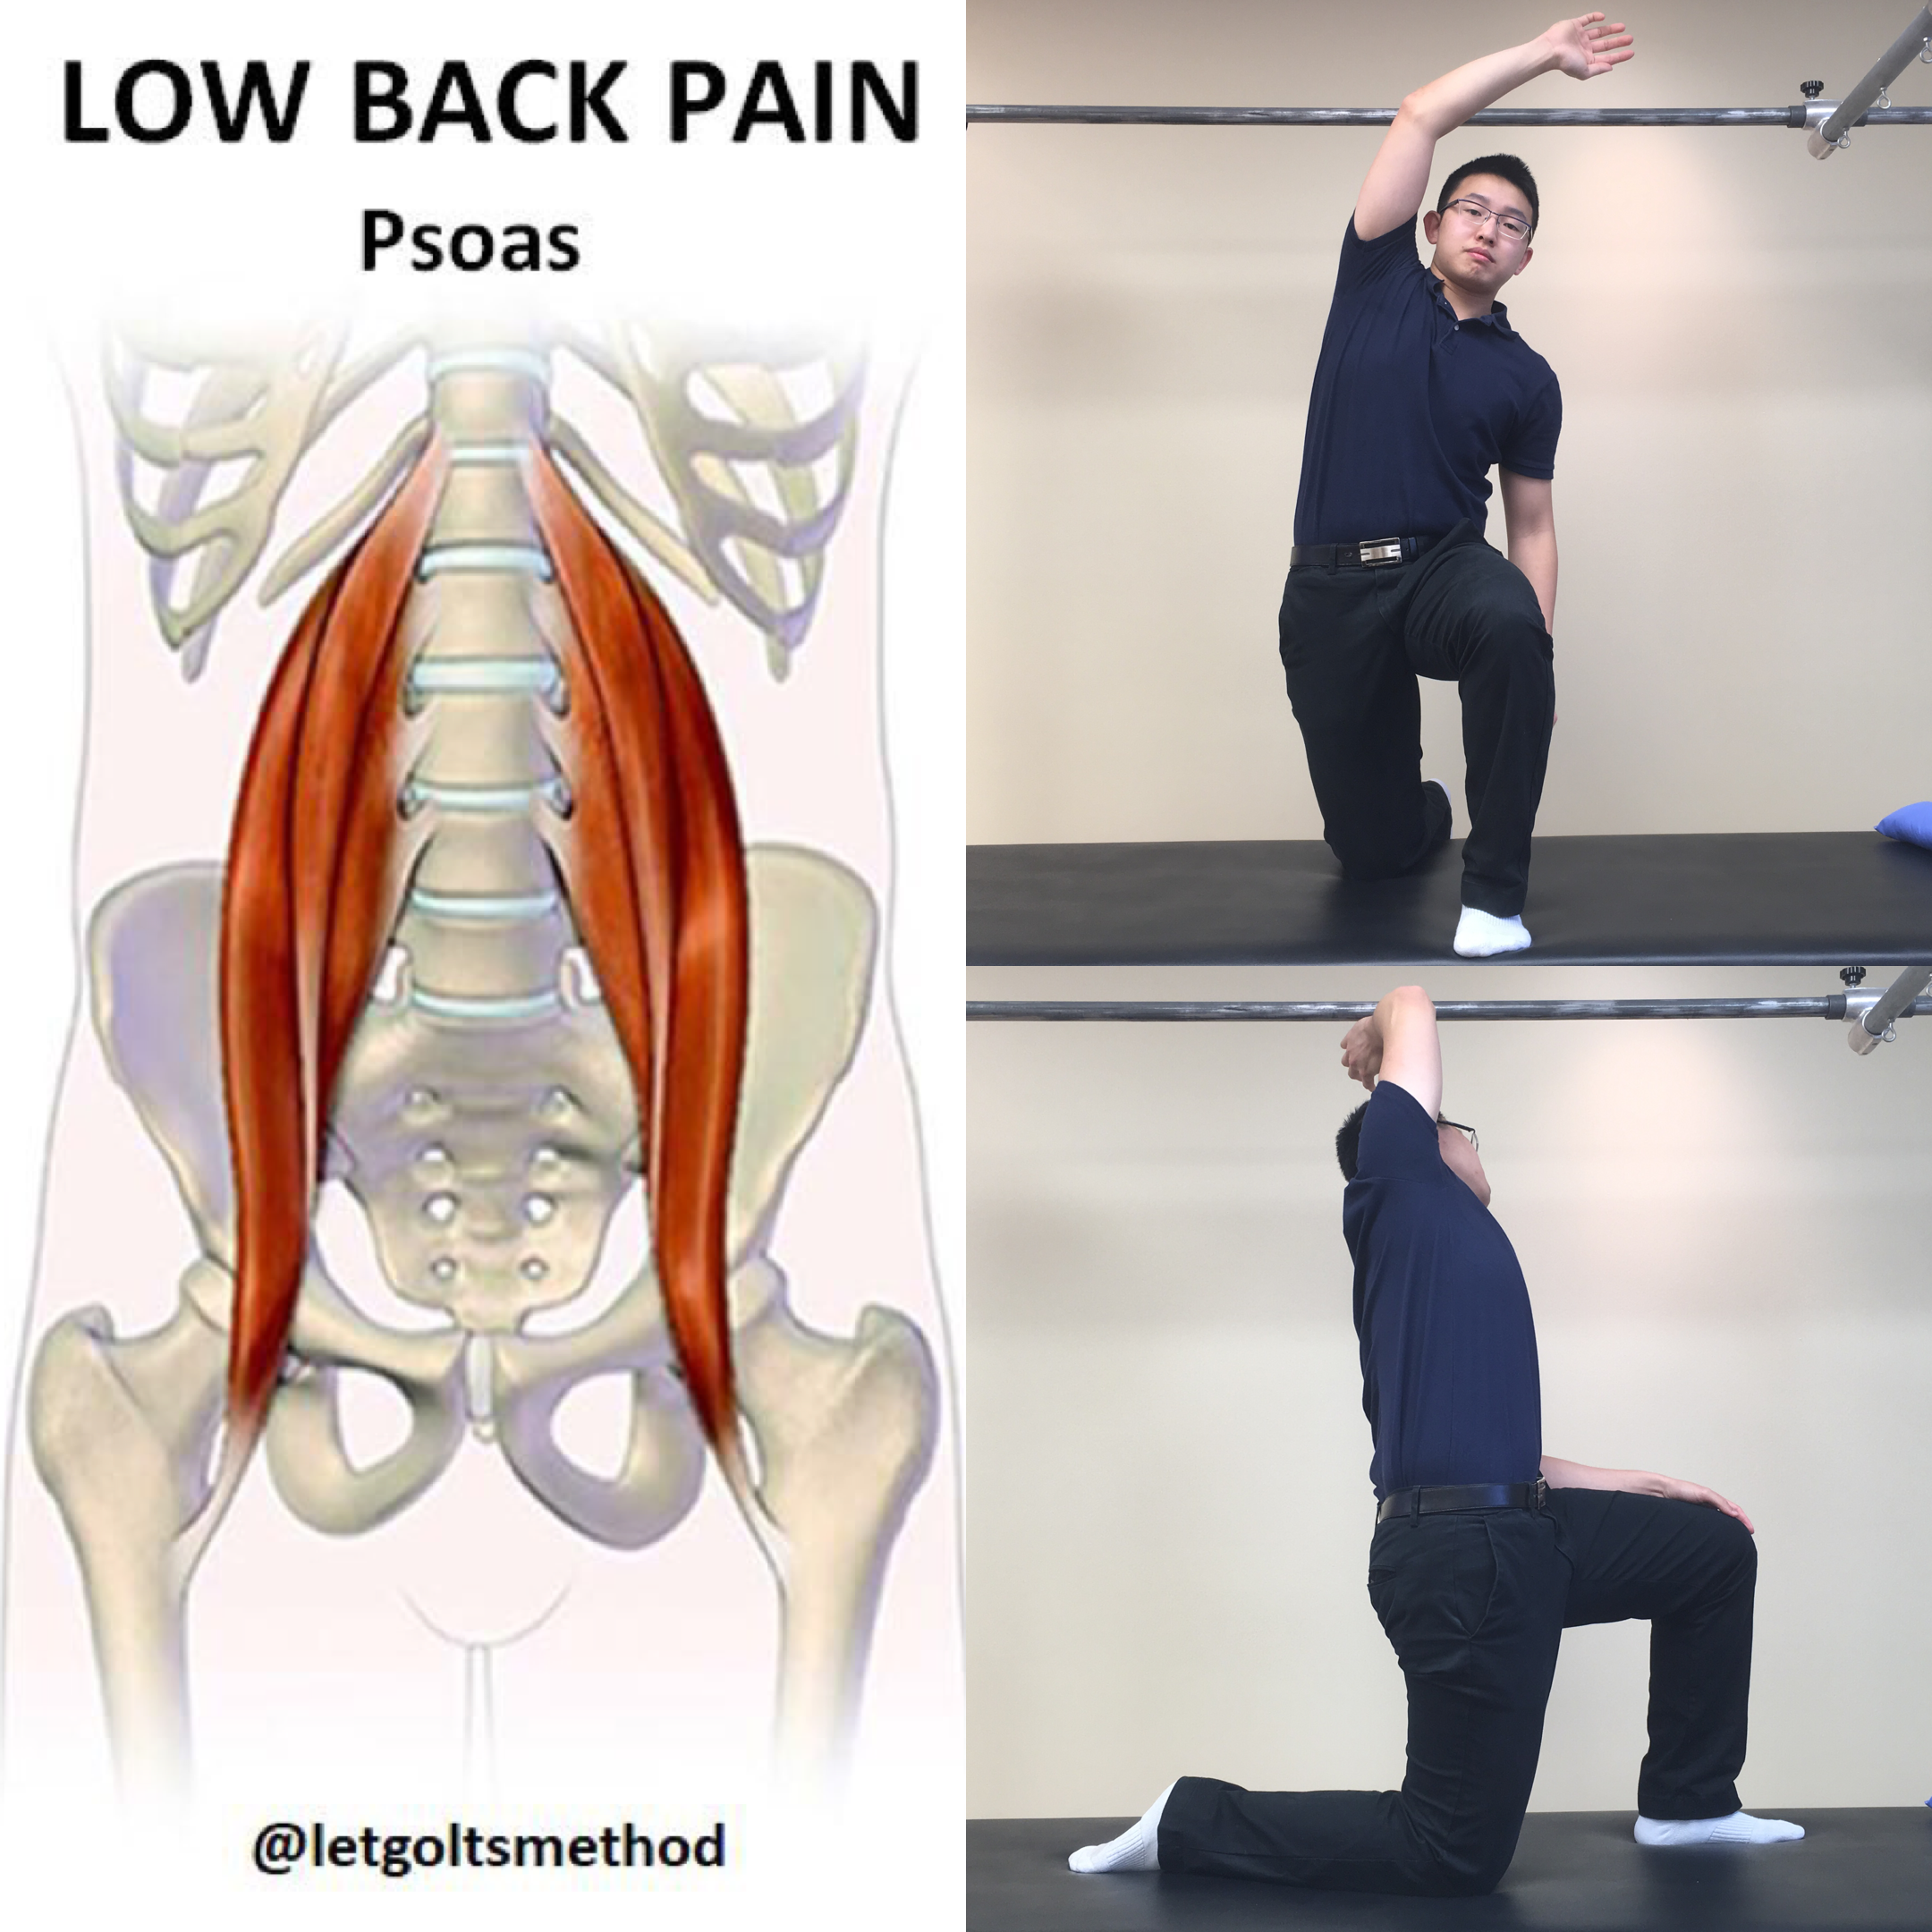 The Role of the Psoas Muscle in Lower Back Pain